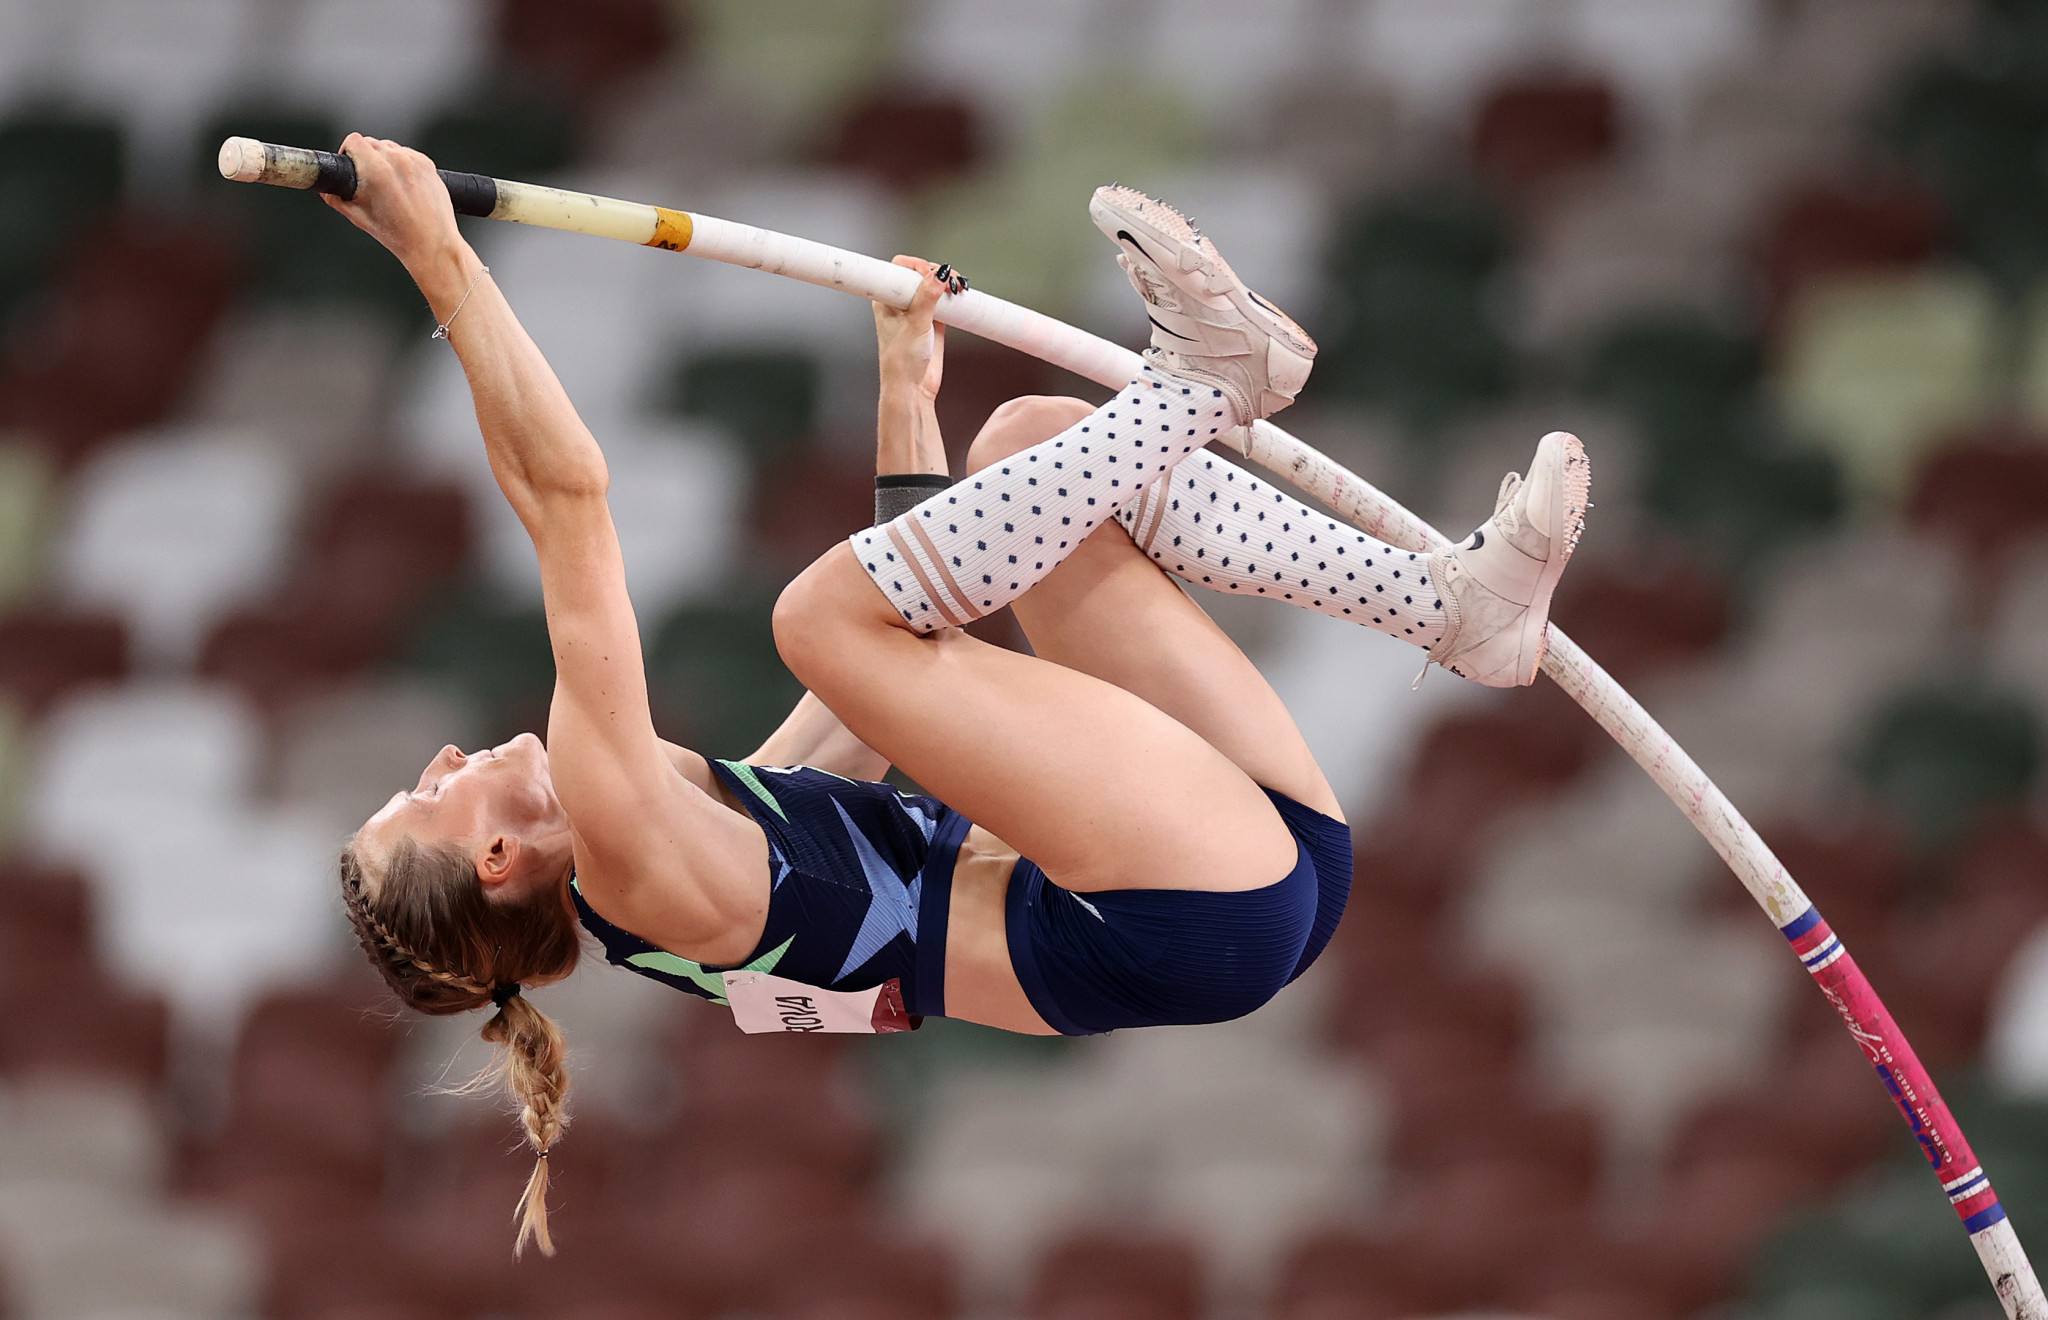 Pole vaulter Anzhelika Sidorova was one of only 10 Russian athletes allowed to compete at Tokyo 2020 but won an Olympic silver medal ©Getty Images